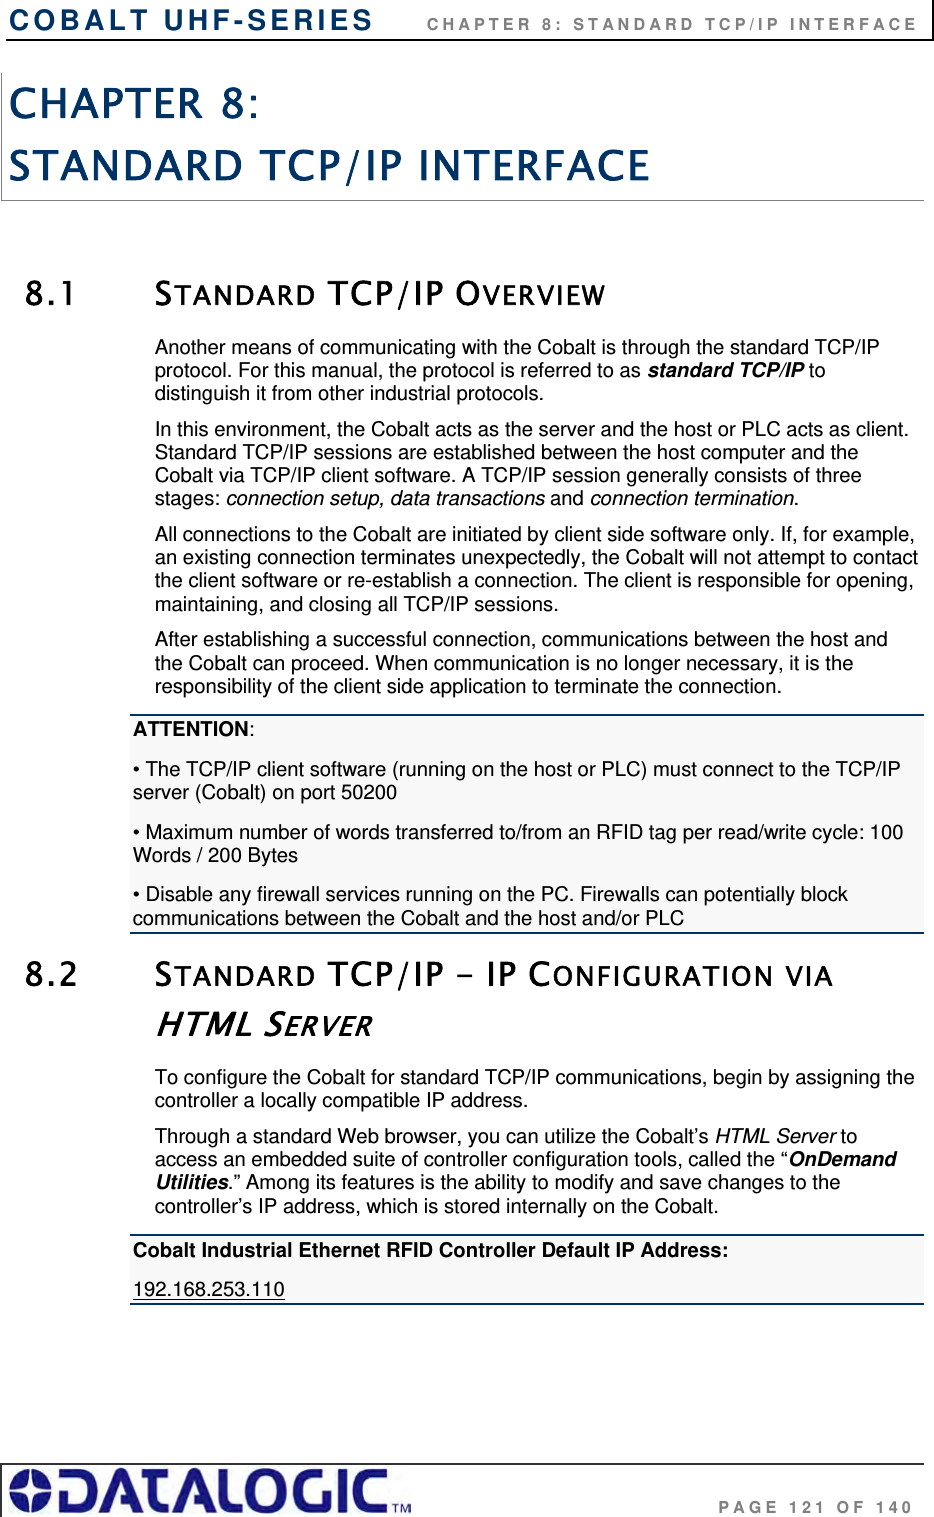 COBALT UHF-SERIES      CHAPTER 8: STANDARD TCP/IP INTERFACE                                     PAGE 121 OF 140 CHAPTER 8:  STANDARD TCP/IP INTERFACE   8.1 STANDARD TCP/IP OVERVIEW Another means of communicating with the Cobalt is through the standard TCP/IP protocol. For this manual, the protocol is referred to as standard TCP/IP to distinguish it from other industrial protocols.  In this environment, the Cobalt acts as the server and the host or PLC acts as client. Standard TCP/IP sessions are established between the host computer and the Cobalt via TCP/IP client software. A TCP/IP session generally consists of three stages: connection setup, data transactions and connection termination.  All connections to the Cobalt are initiated by client side software only. If, for example, an existing connection terminates unexpectedly, the Cobalt will not attempt to contact the client software or re-establish a connection. The client is responsible for opening, maintaining, and closing all TCP/IP sessions. After establishing a successful connection, communications between the host and the Cobalt can proceed. When communication is no longer necessary, it is the responsibility of the client side application to terminate the connection. ATTENTION: • The TCP/IP client software (running on the host or PLC) must connect to the TCP/IP server (Cobalt) on port 50200 • Maximum number of words transferred to/from an RFID tag per read/write cycle: 100 Words / 200 Bytes  • Disable any firewall services running on the PC. Firewalls can potentially block communications between the Cobalt and the host and/or PLC 8.2 STANDARD TCP/IP - IP CONFIGURATION VIA HTML SERVER To configure the Cobalt for standard TCP/IP communications, begin by assigning the controller a locally compatible IP address.  Through a standard Web browser, you can utilize the Cobalt’s HTML Server to access an embedded suite of controller configuration tools, called the “OnDemand Utilities.” Among its features is the ability to modify and save changes to the controller’s IP address, which is stored internally on the Cobalt.  Cobalt Industrial Ethernet RFID Controller Default IP Address: 192.168.253.110     